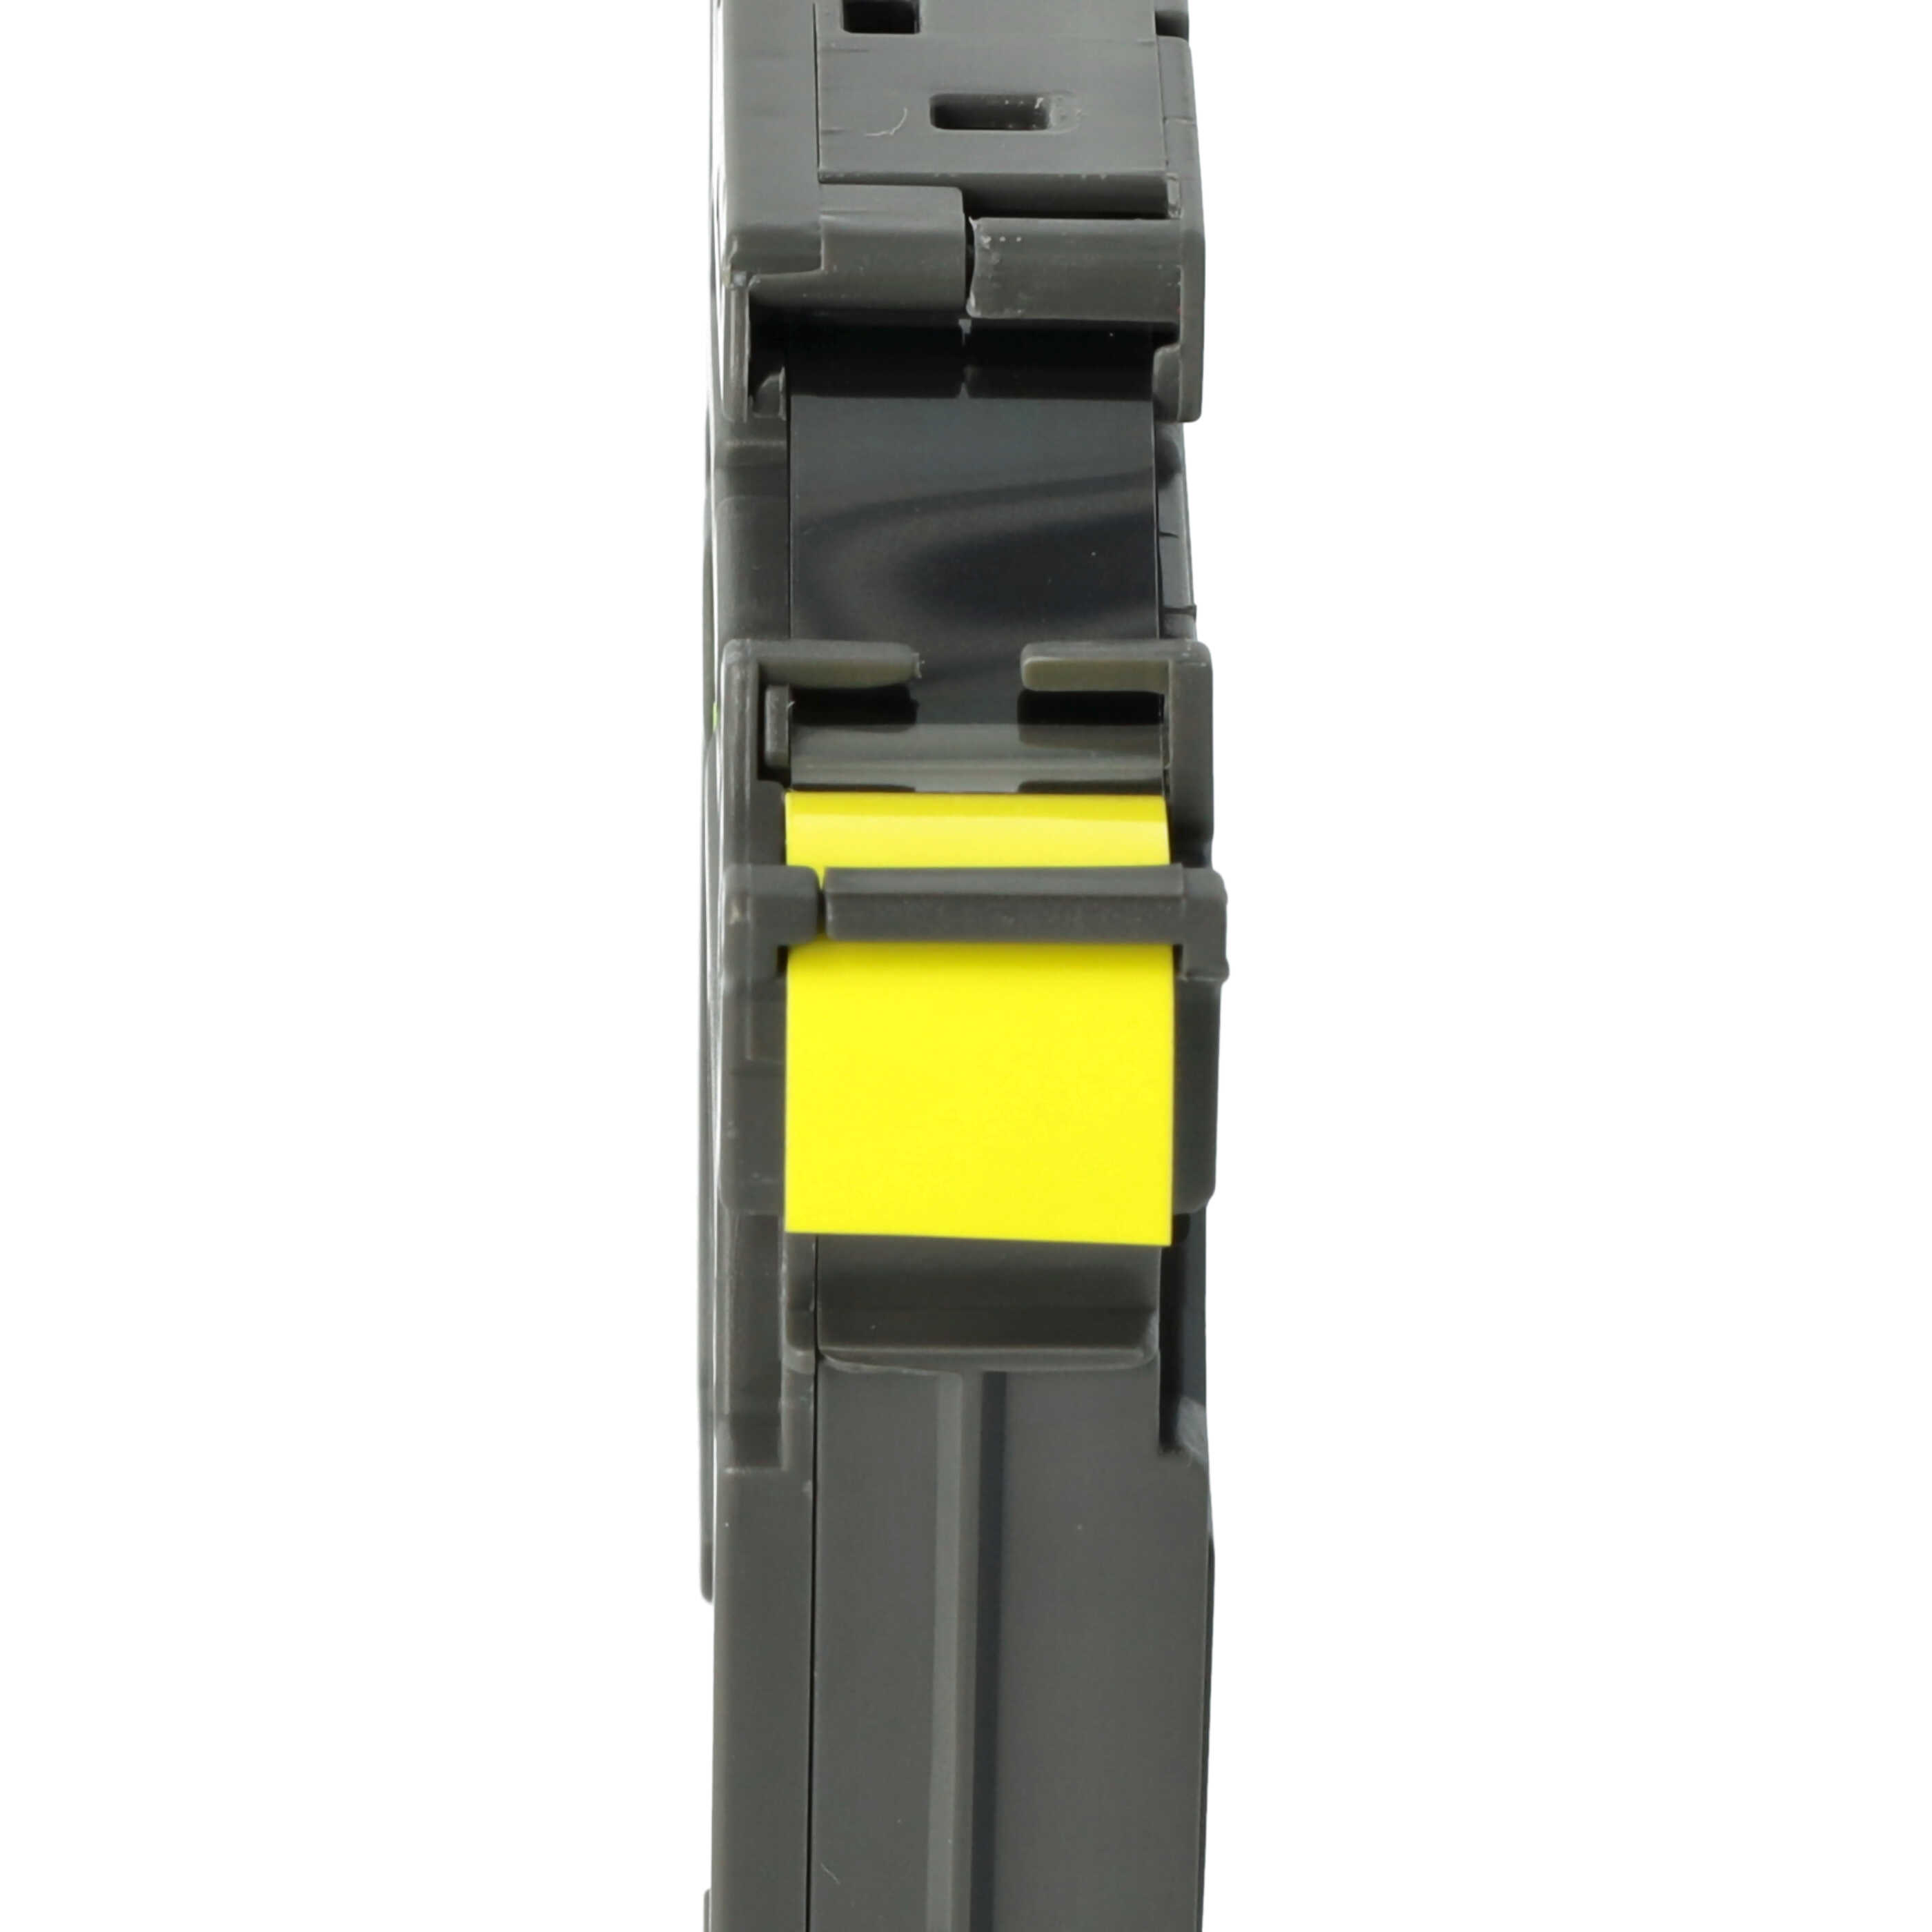 Label Tape as Replacement for Brother TZE-S631 - 12 mm Black to Yellow, Extra Stark